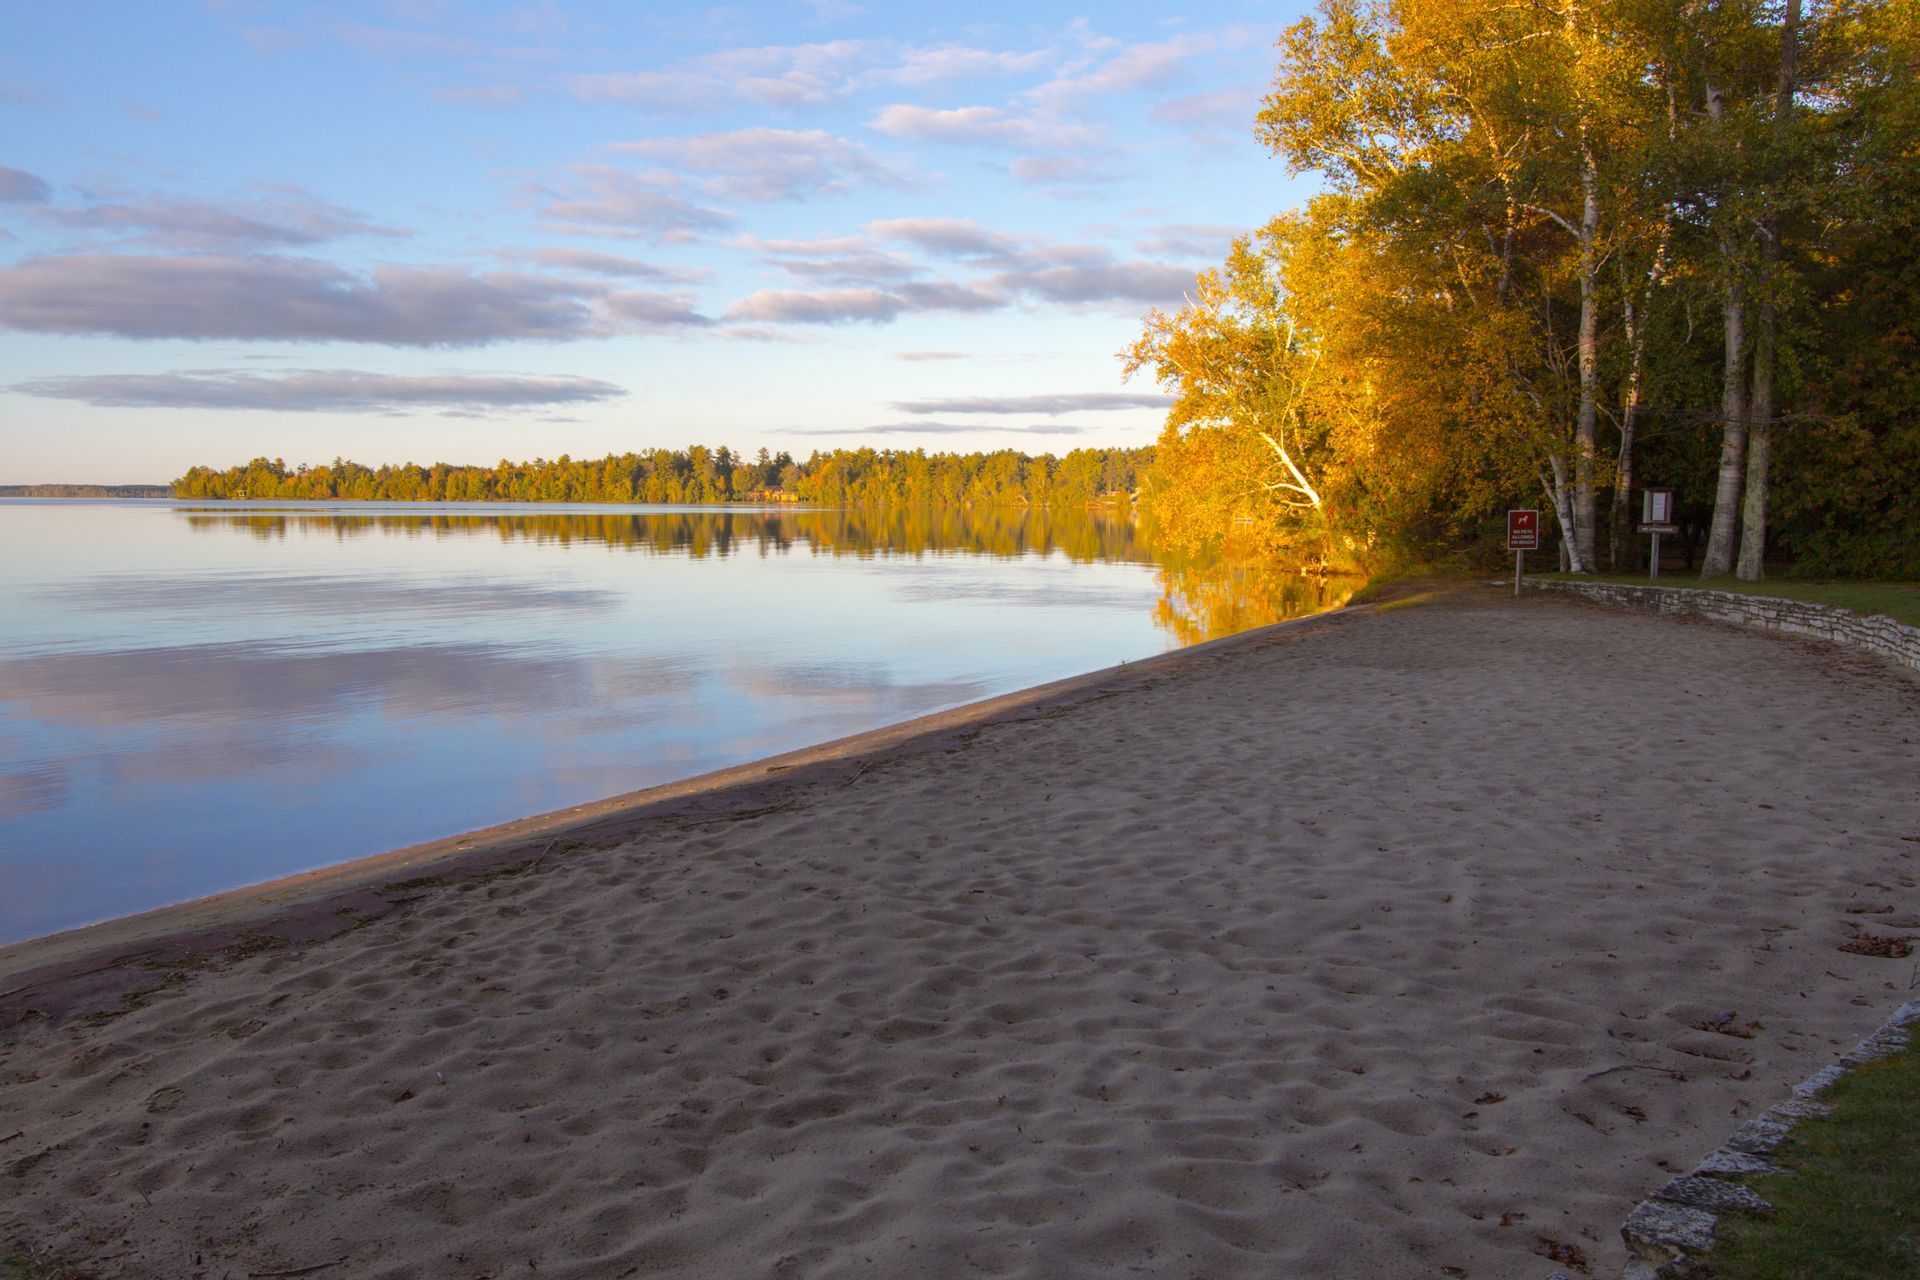 a sandy beach next to a lake with trees in the background .